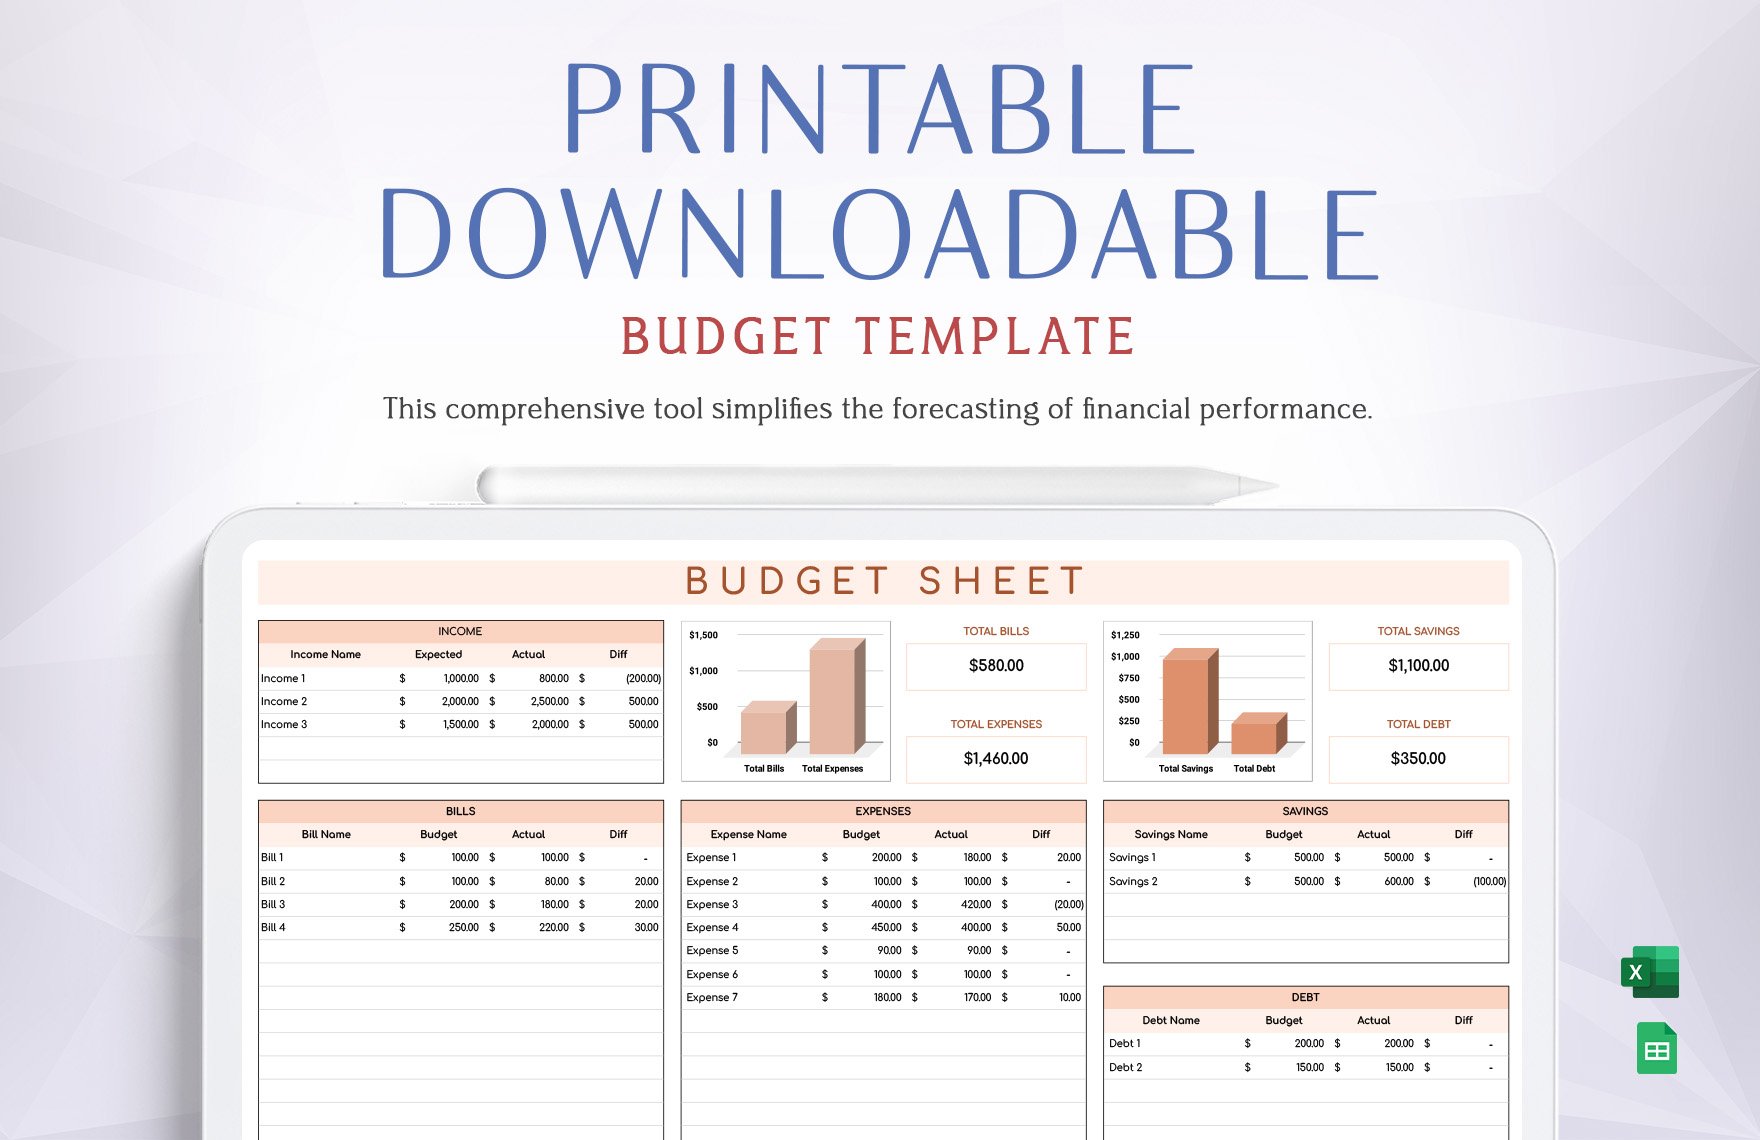 Free Printable, Downloadable Budget Template in Excel, Google Sheets